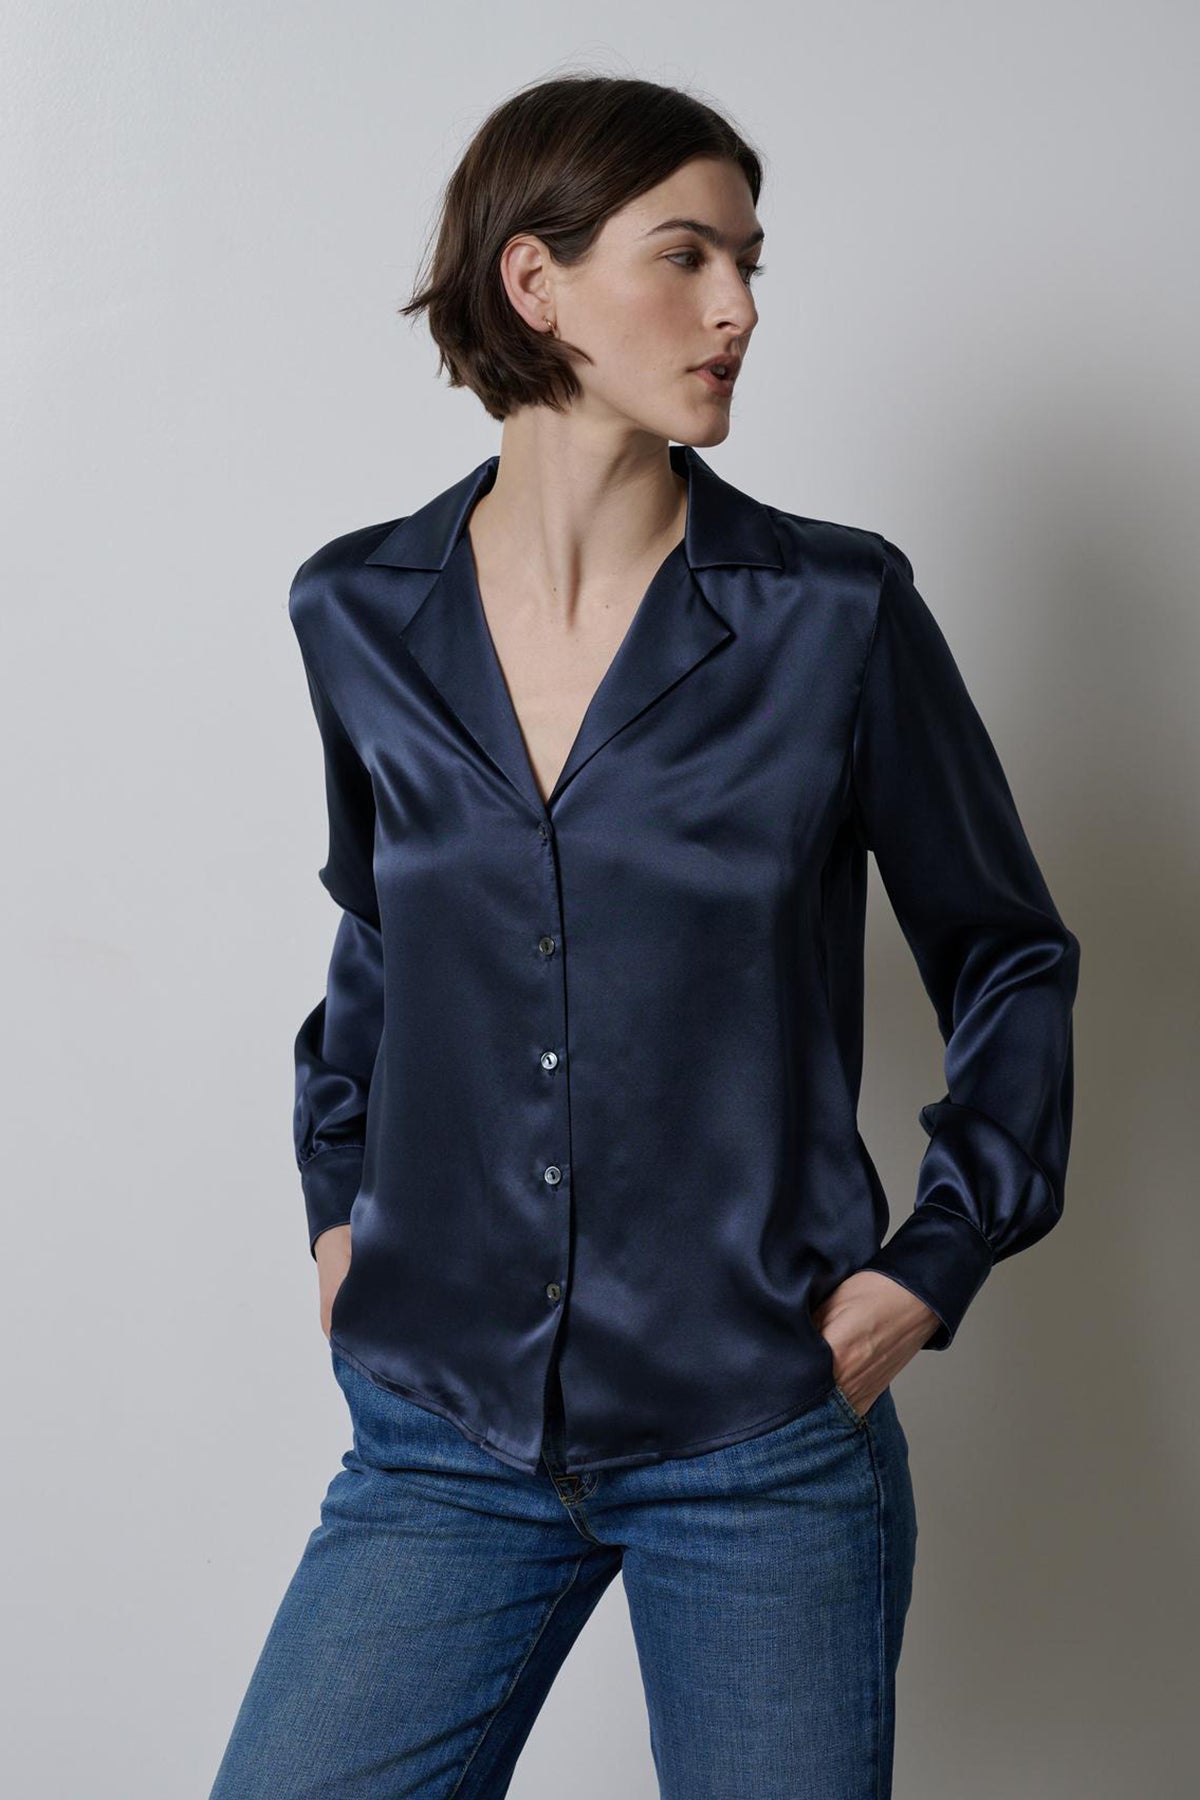 The model is wearing a Velvet by Jenny Graham navy silk charmeuse SOHO TOP, a timeless and elegant choice.-35548175171777